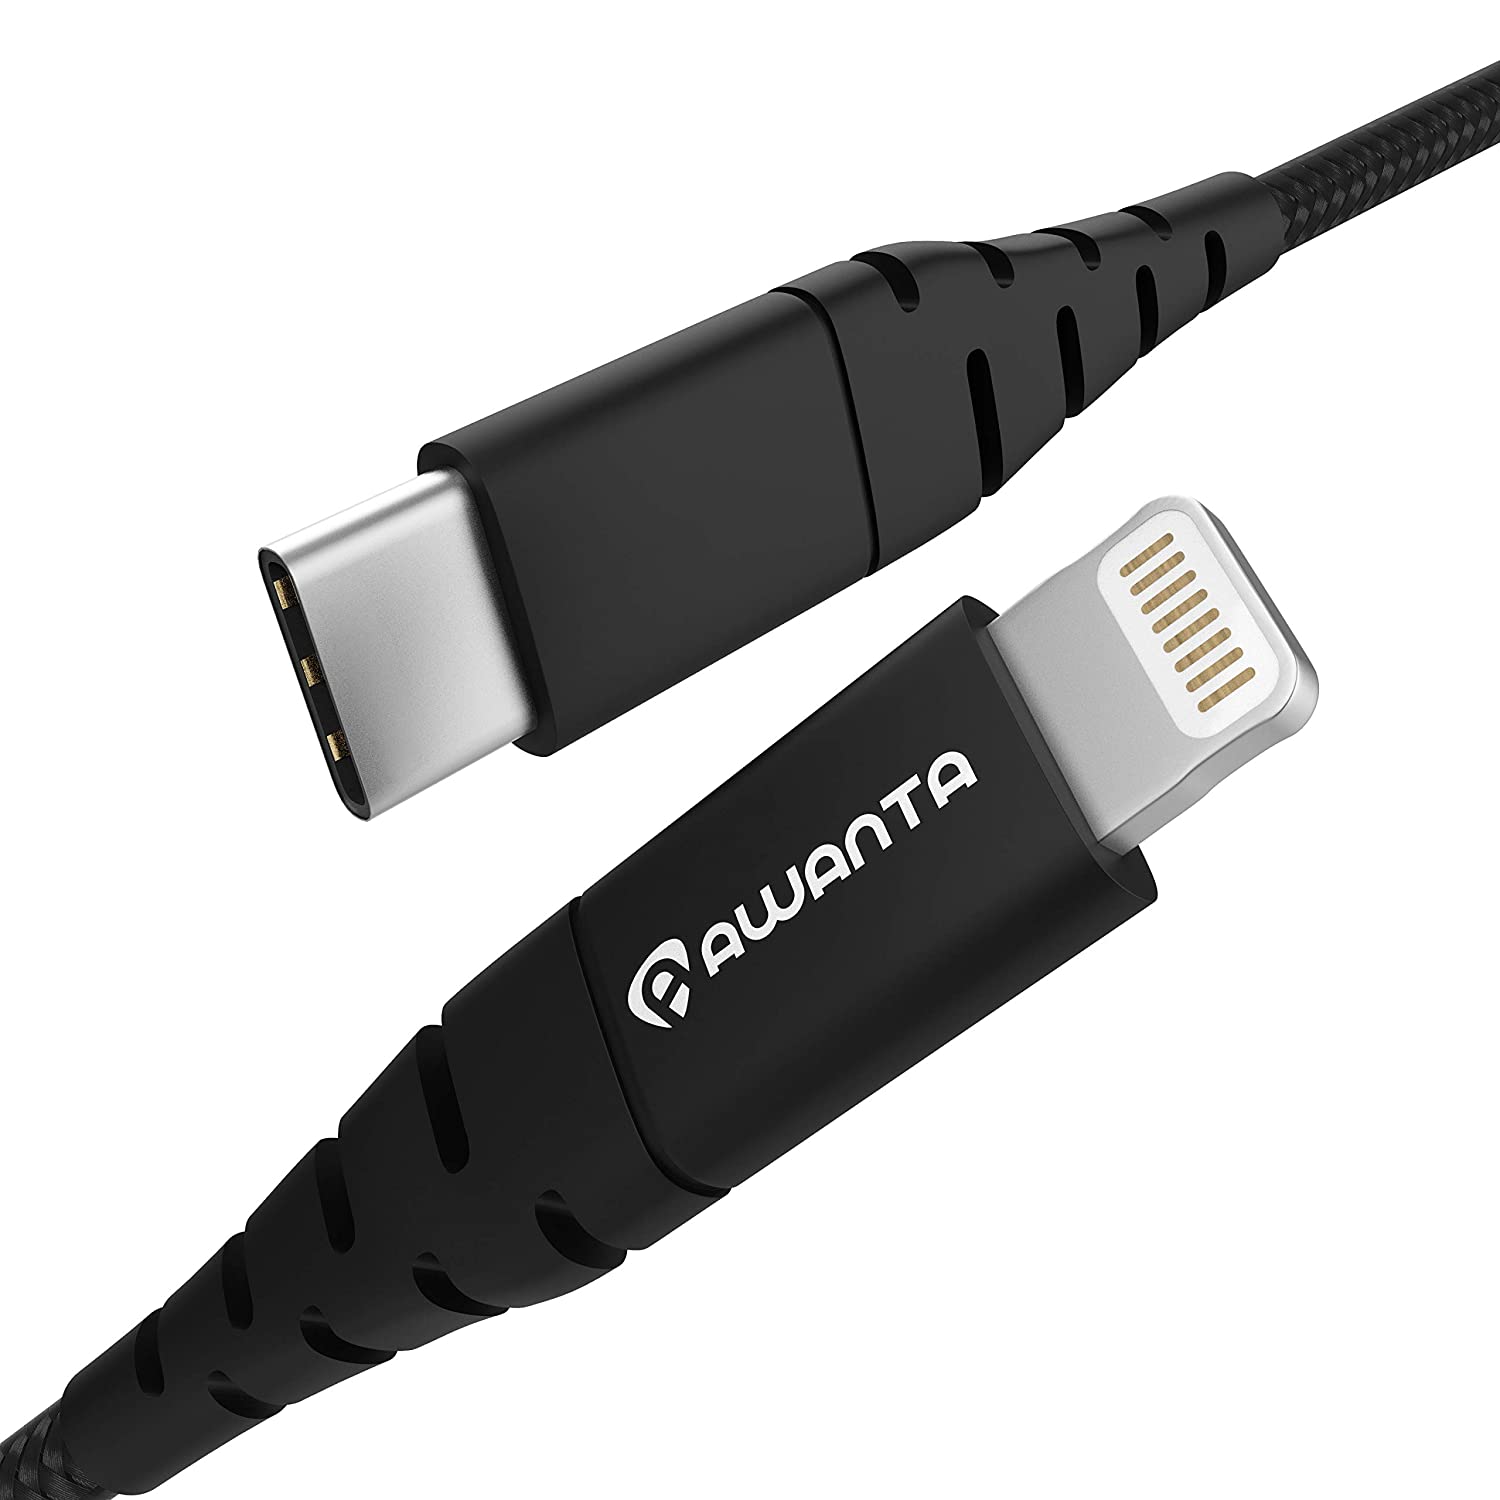 USB C to Lightning Cable [ Apple Mfi Certified]